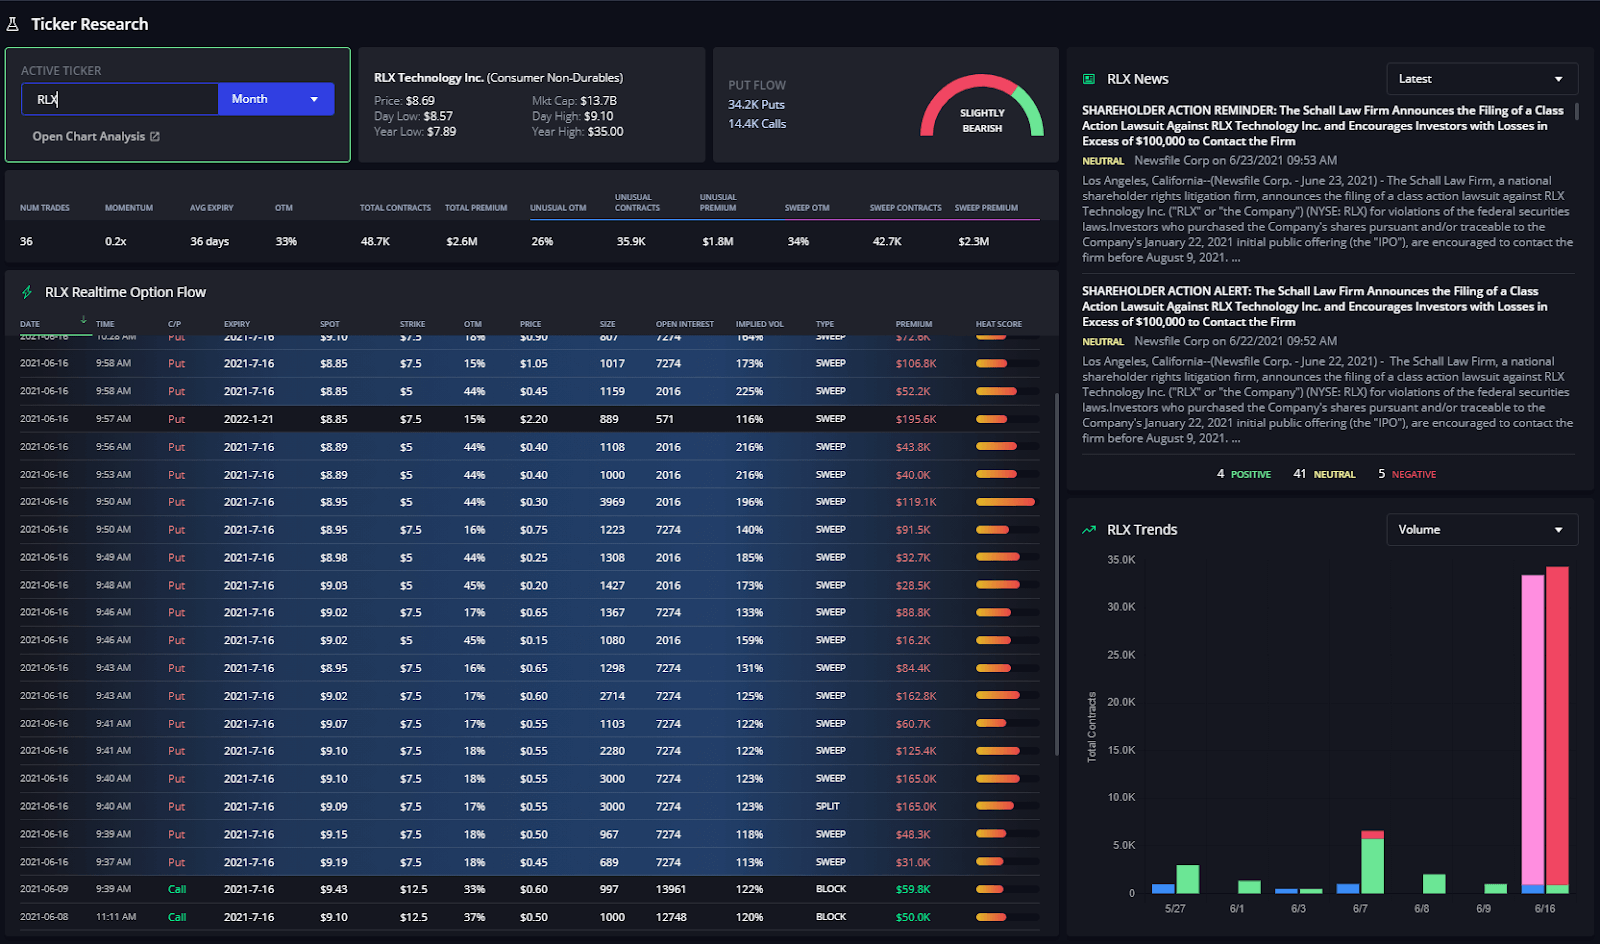 InsiderFinance Ticker Research page for RLX with options flow and news sentiment